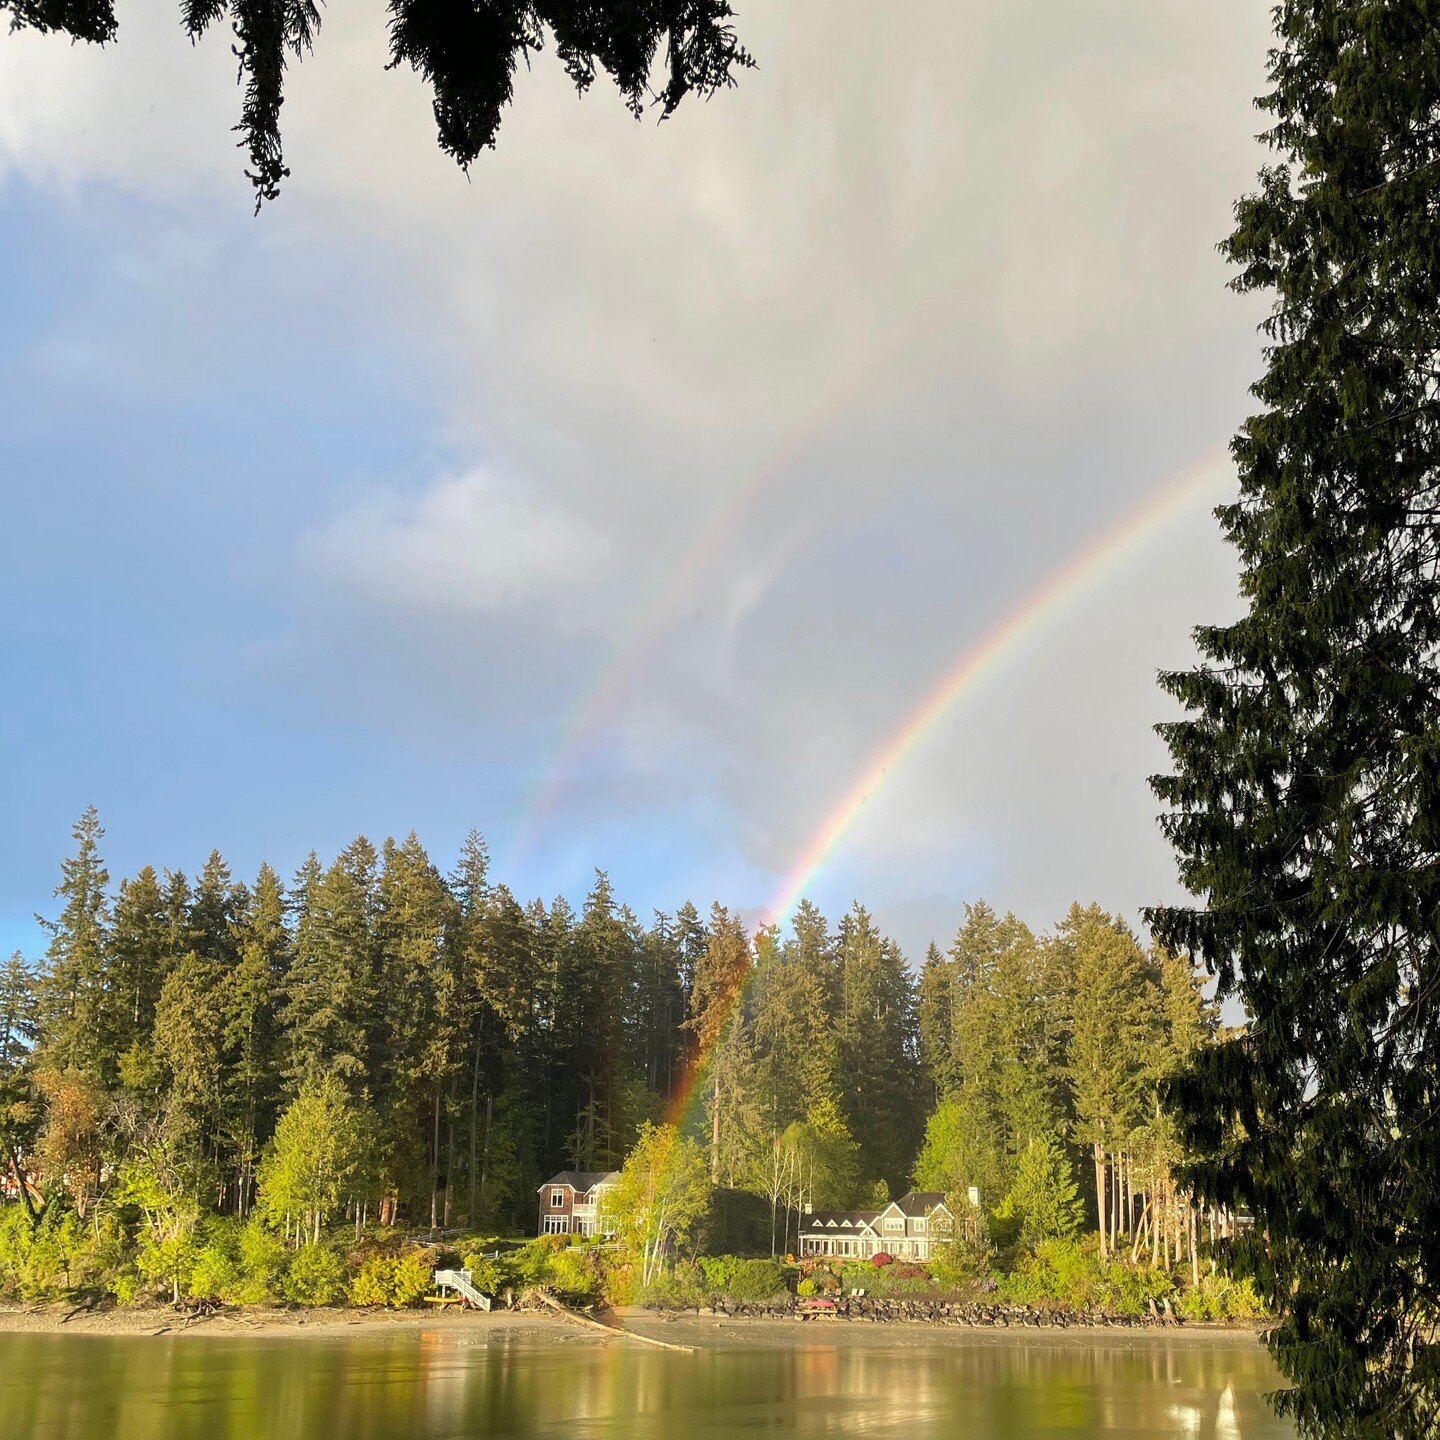 🌈🌈🌈 over Little Manzanita Bay for Pride Month. We are fighting to preserve the tranquility of the bay and prevent the building of deep water docks that will likely cause irreversible harm to its delicate ecosystems. Join us.

If you haven't alread